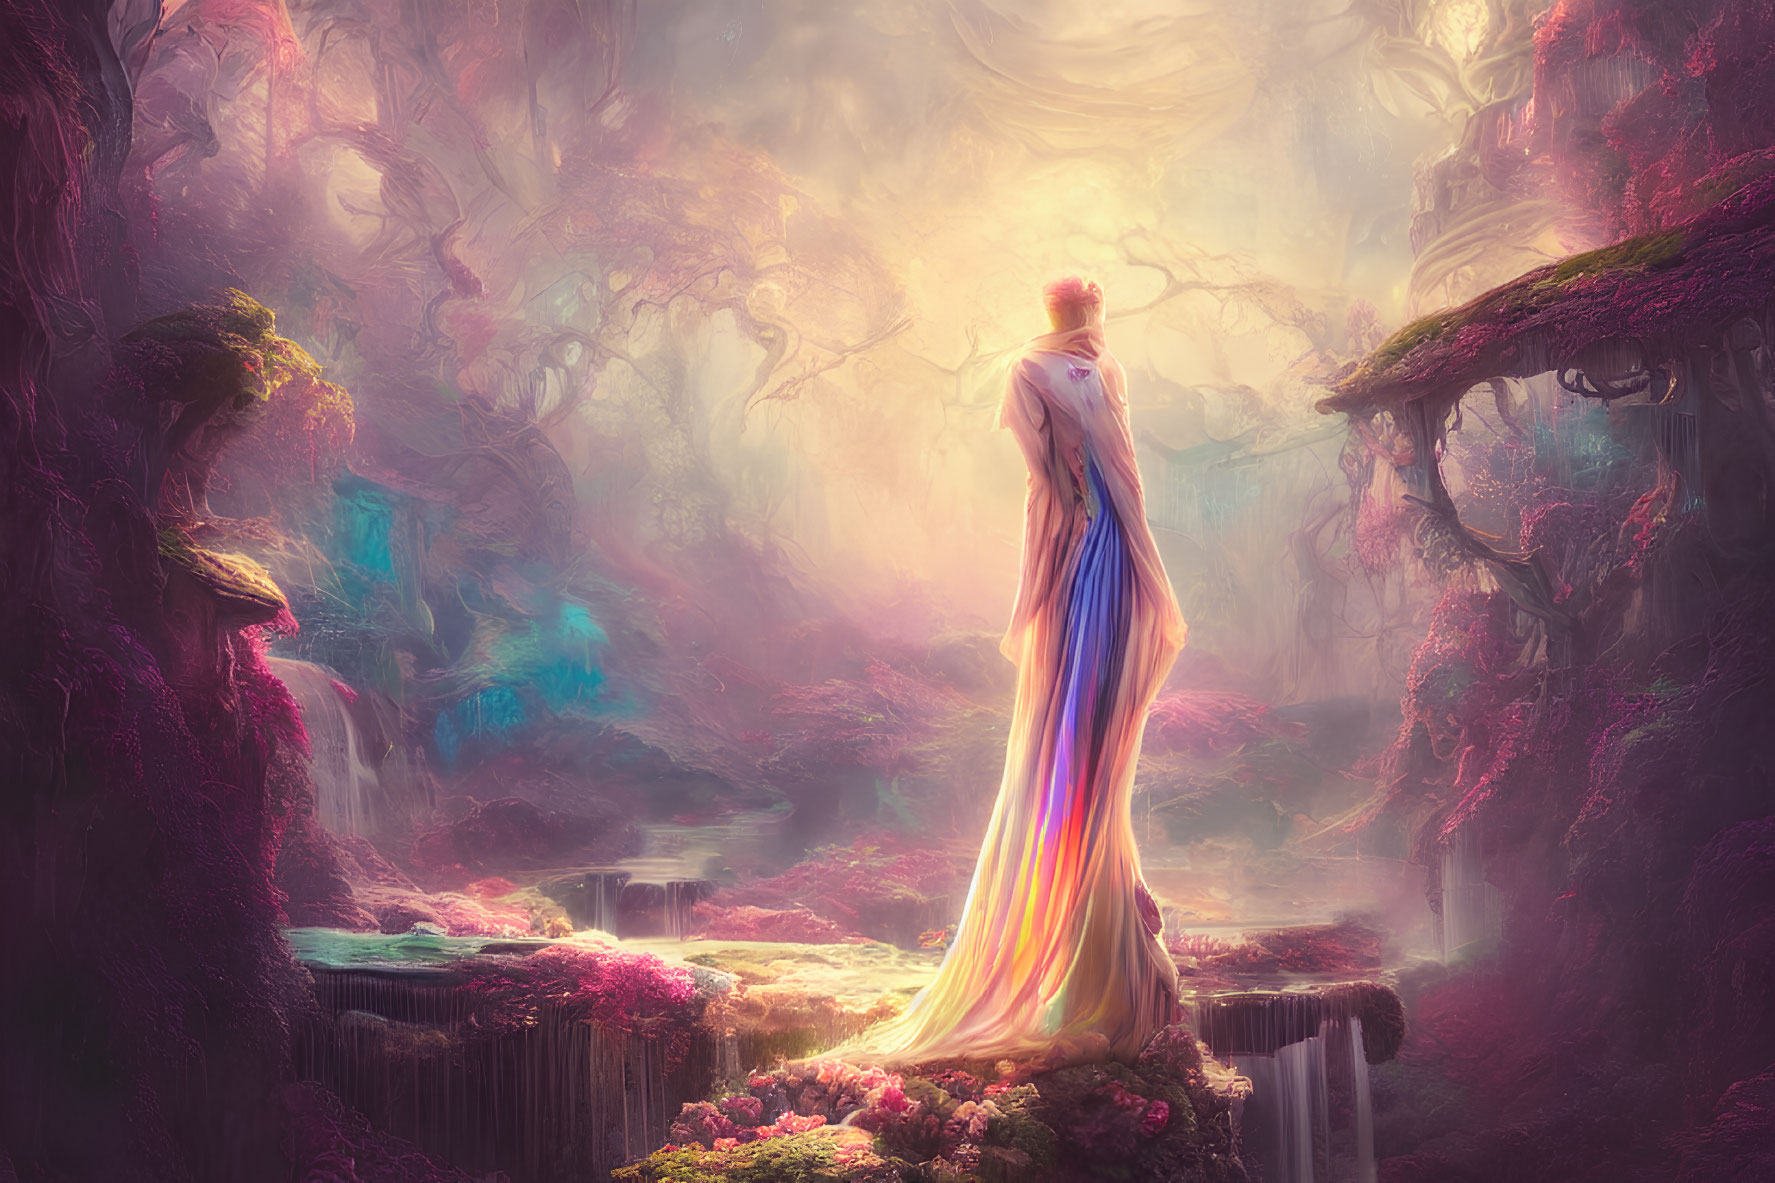 Person in Colorful Robe Overlooking Mystical Forest with Ethereal Trees